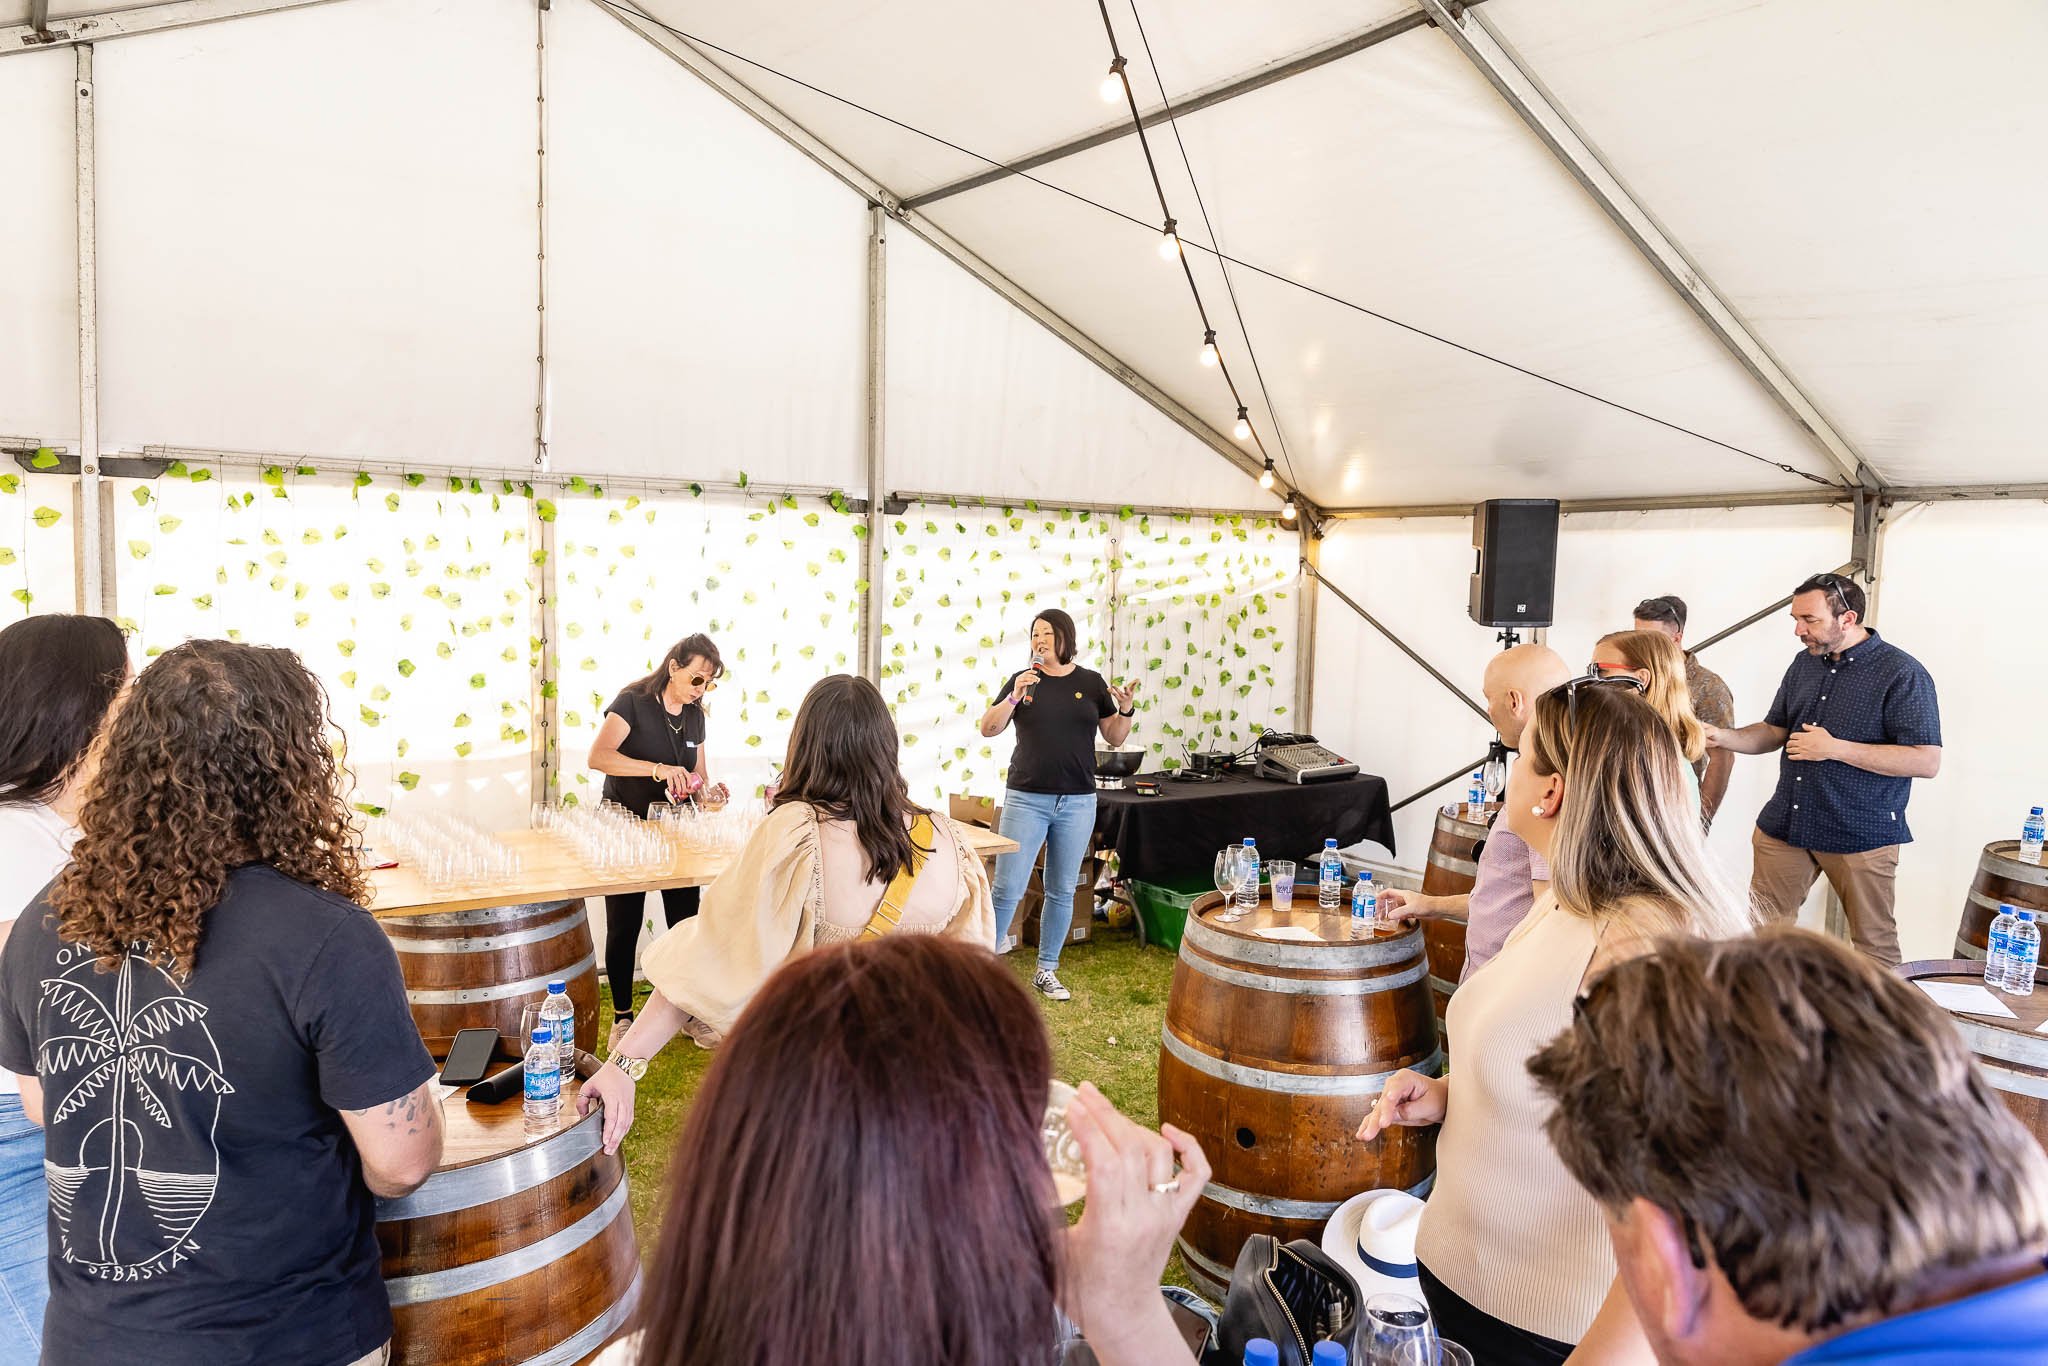 Ammon_Creative-Event_Photography-CMS_Events-UnWined_Subiaco-Image_28.jpg